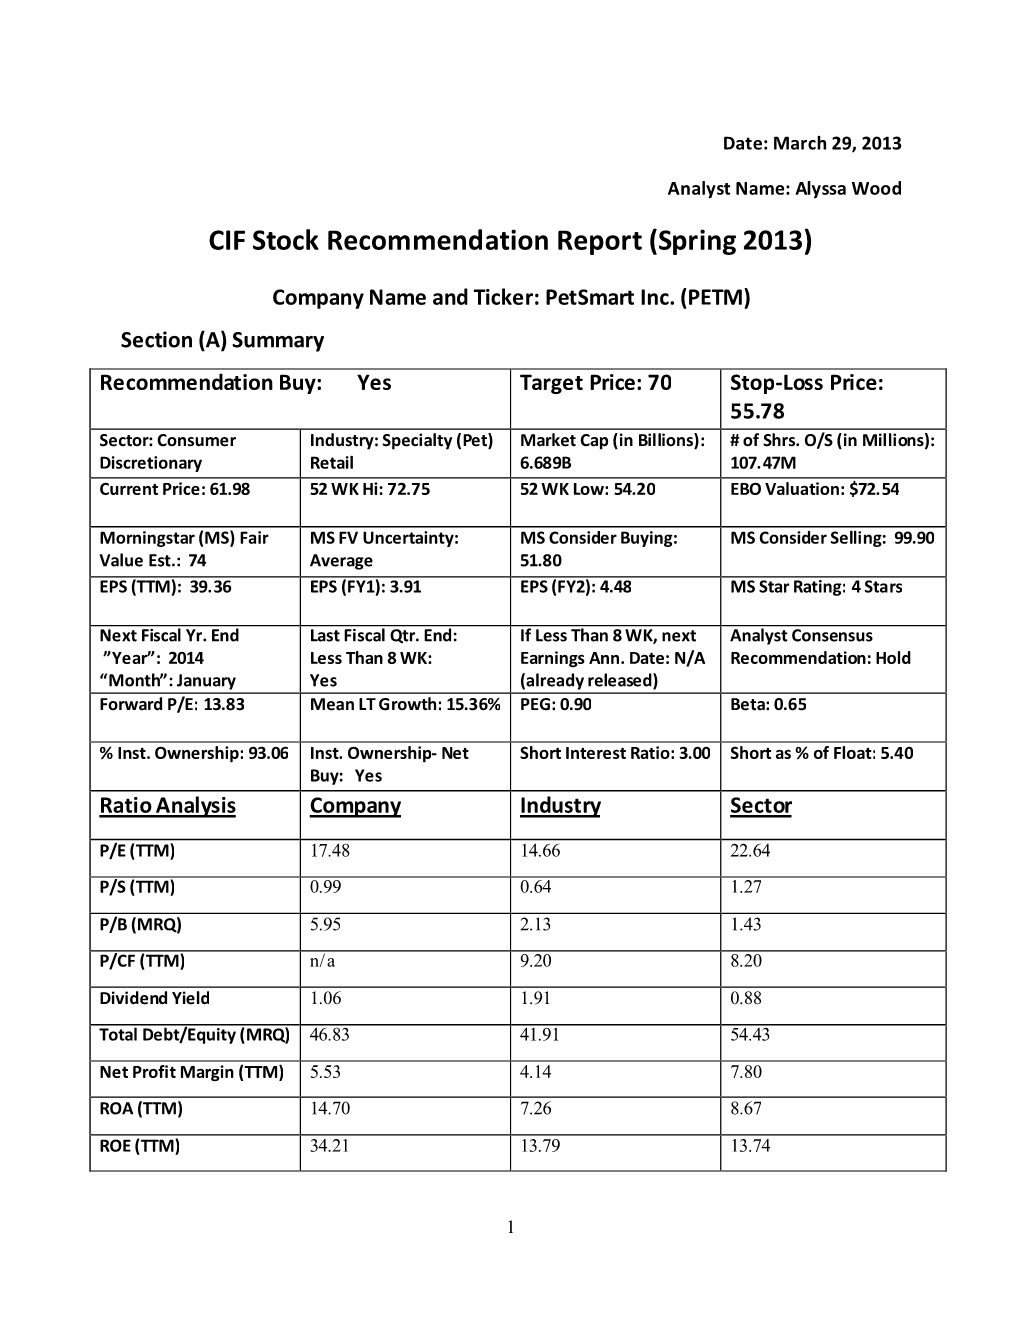 CIF Stock Recommendation Report (Spring 2013)